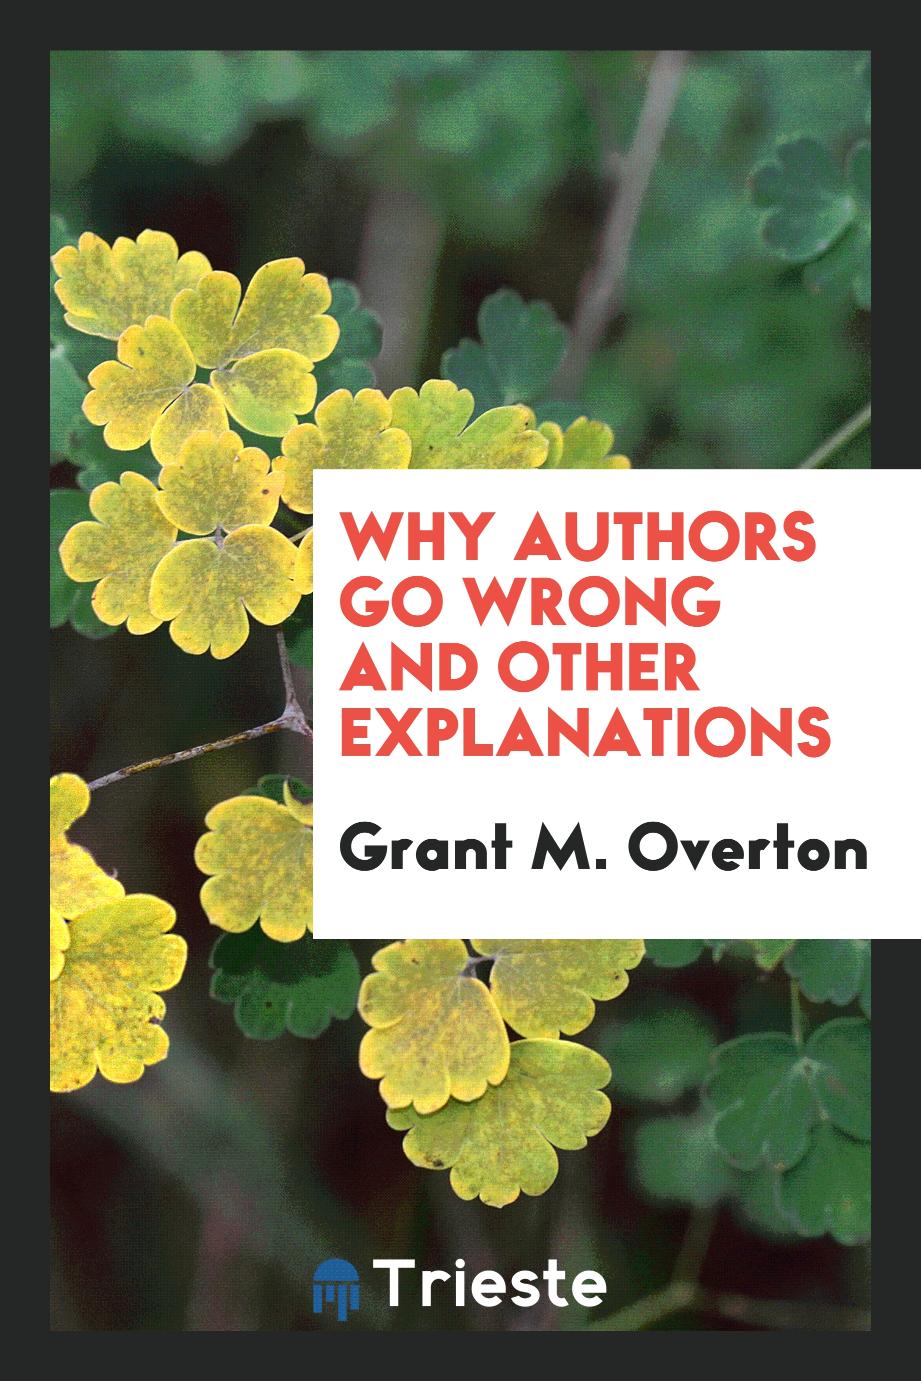 Why authors go wrong and other explanations